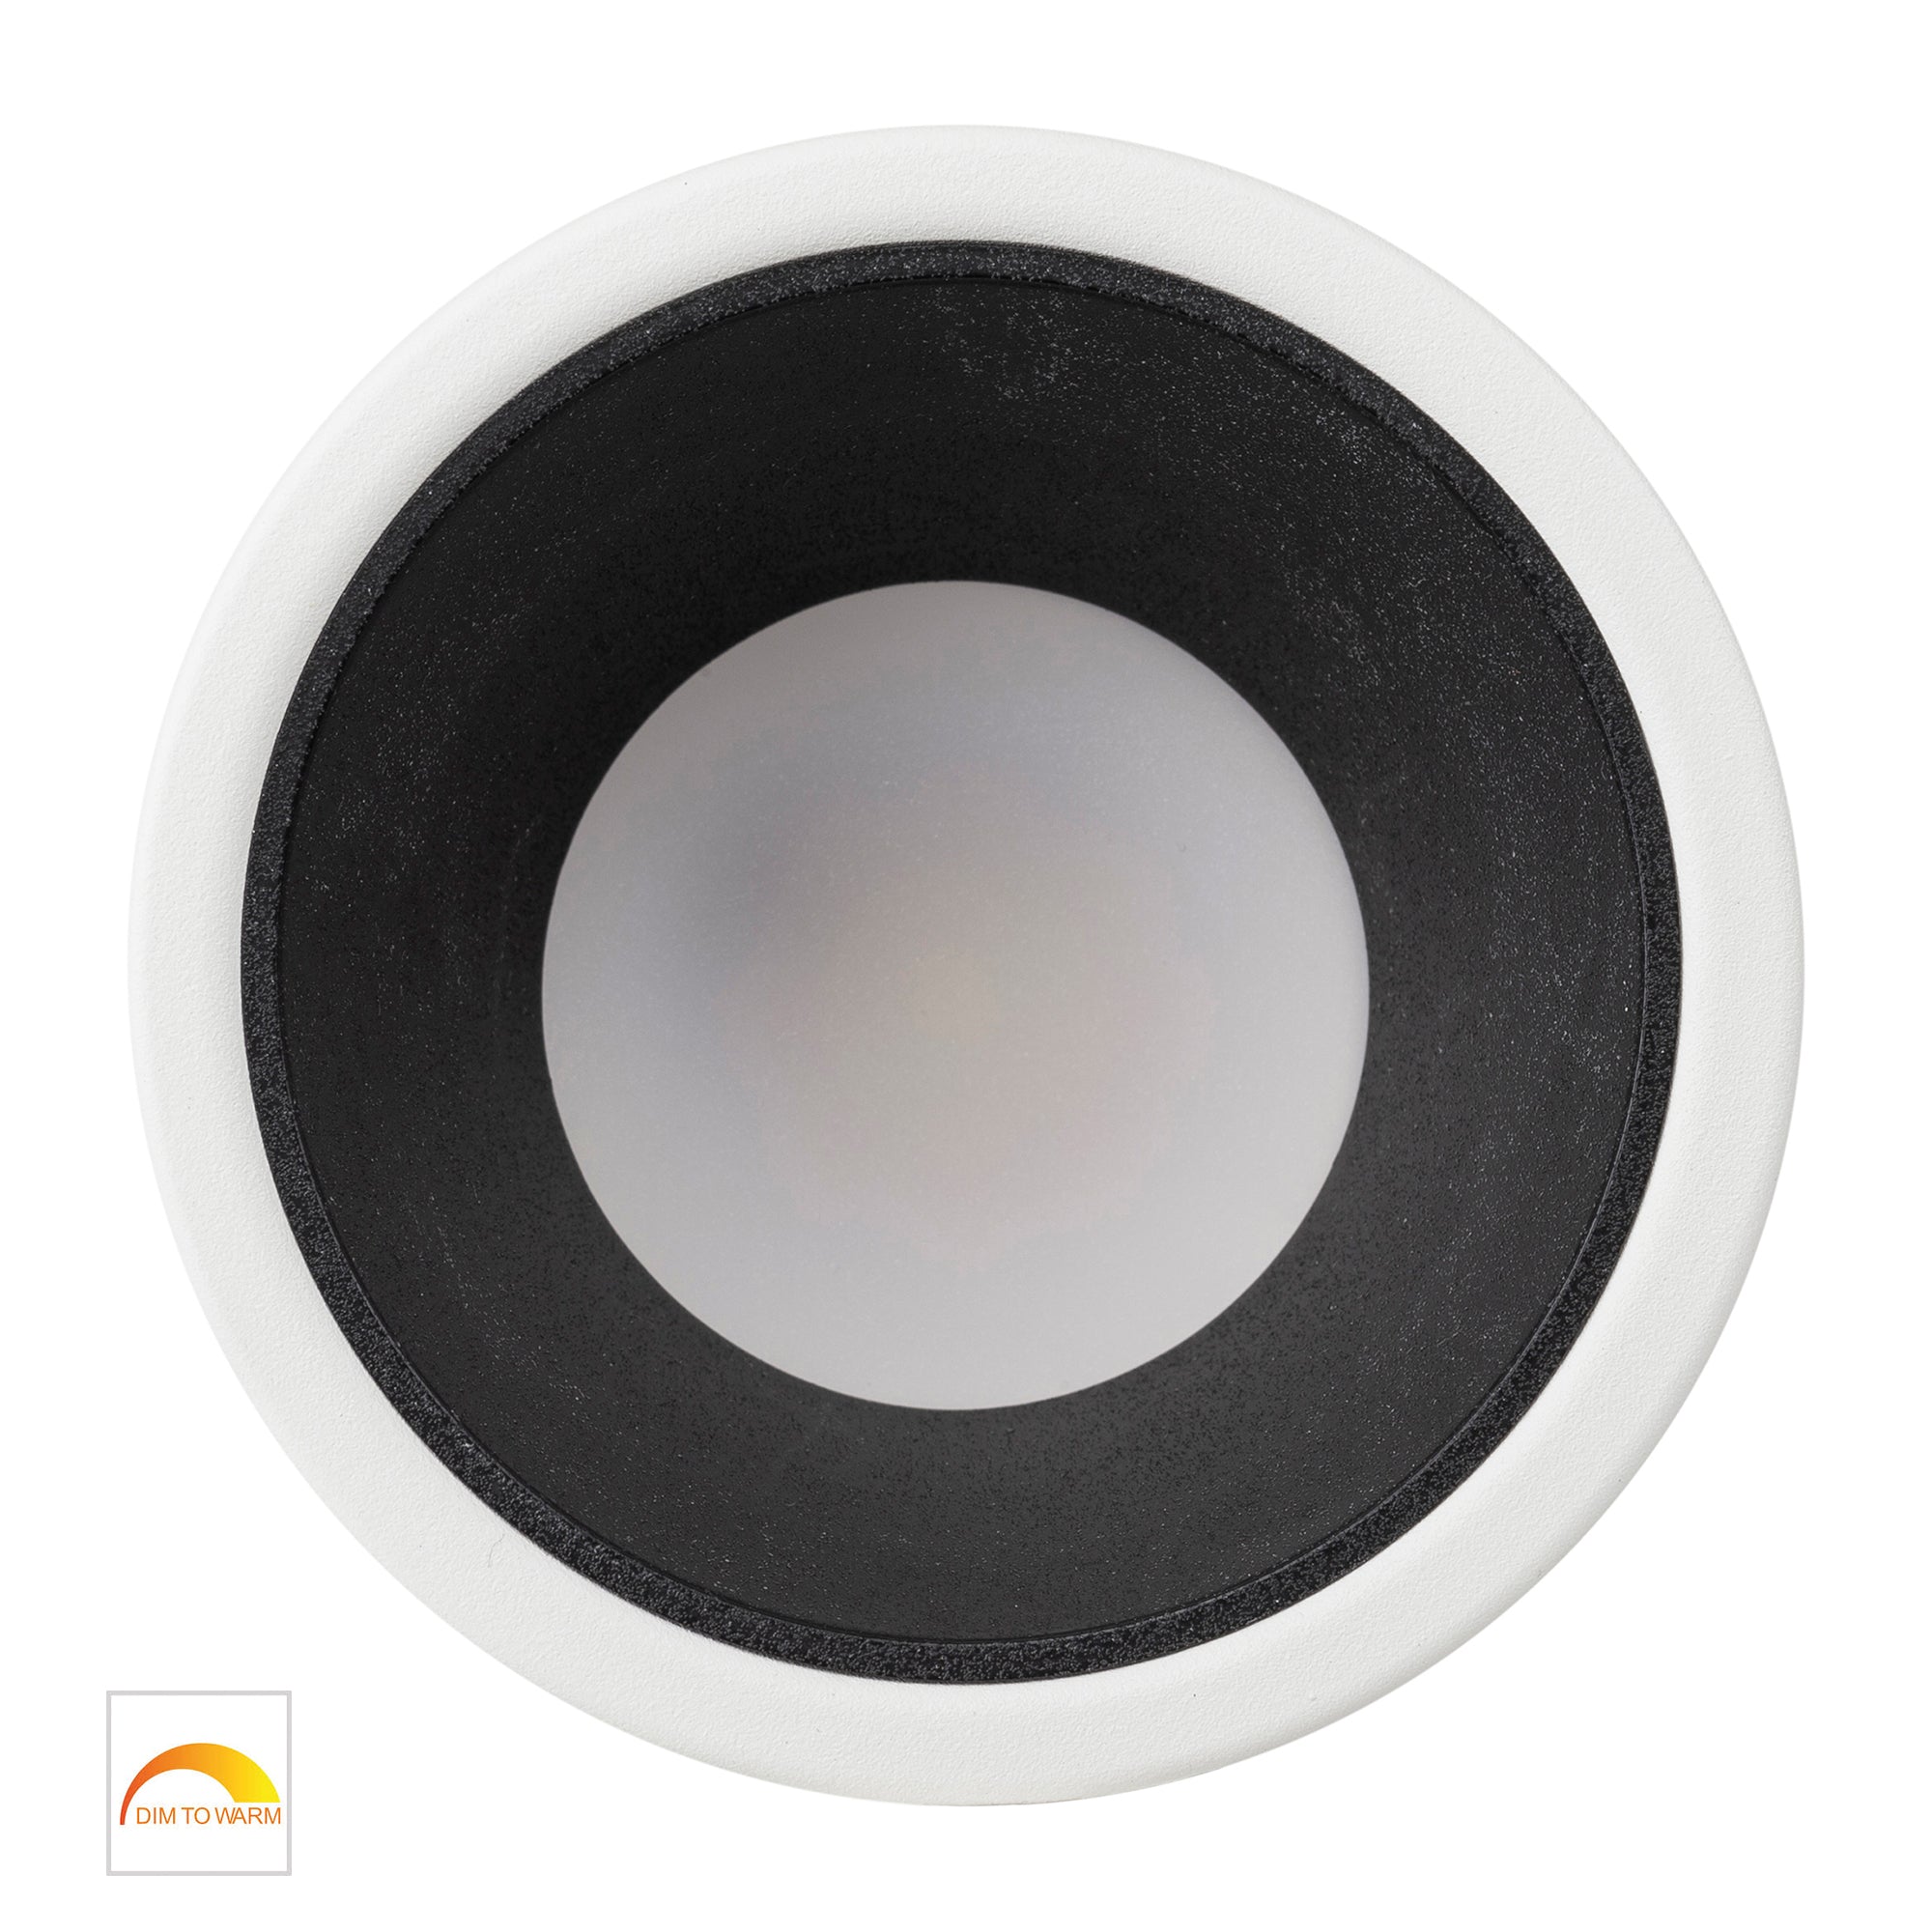 HV5529D2W-WB - Gleam White with Black Insert Fixed Dim to Warm LED Downlight